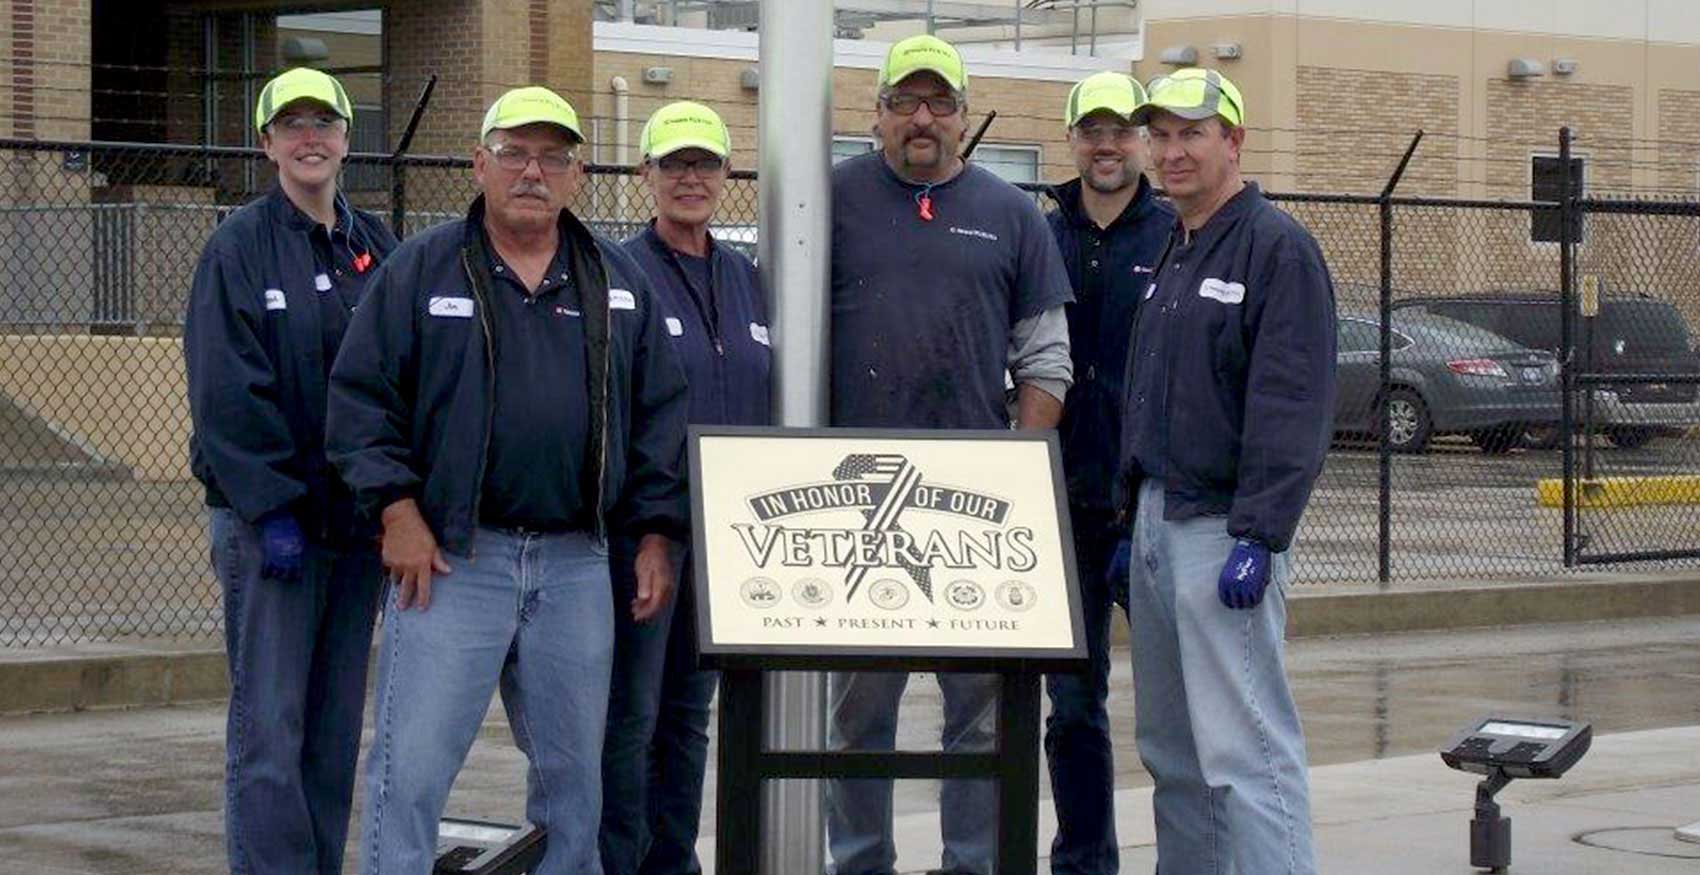 Factory associates standing in front of Honoring Our Veterans sign